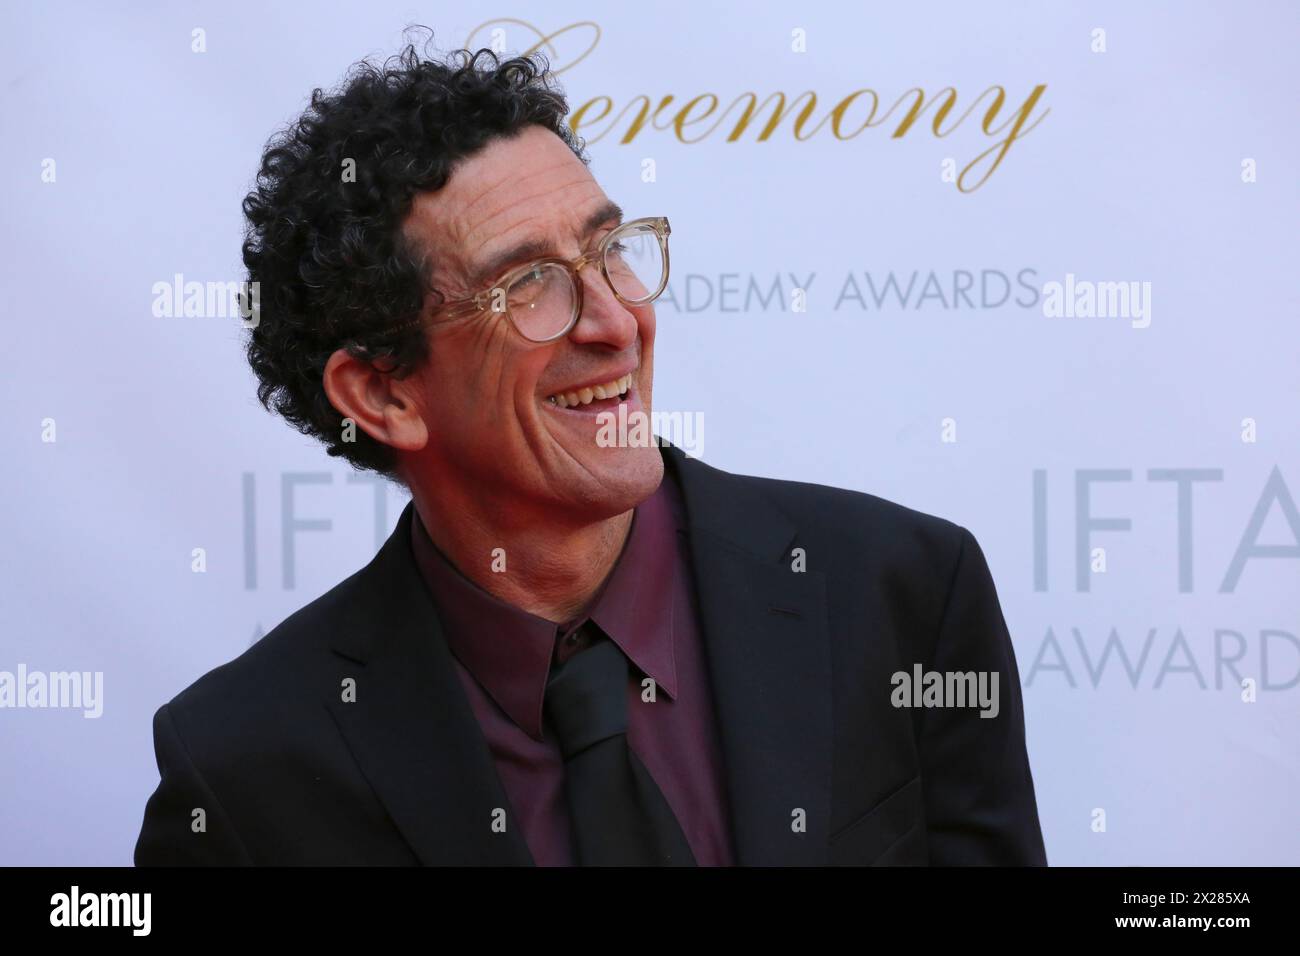 Dublin, Ireland. 20th April 2024.  Cinematographer Robbie Ryan, winner of the award for Cinematography for the film Poor Things, arriving on the red carpet at the Irish Film and Television Awards (IFTA), Dublin Royal Convention Centre. Credit: Doreen Kennedy/Alamy Live News. Stock Photo